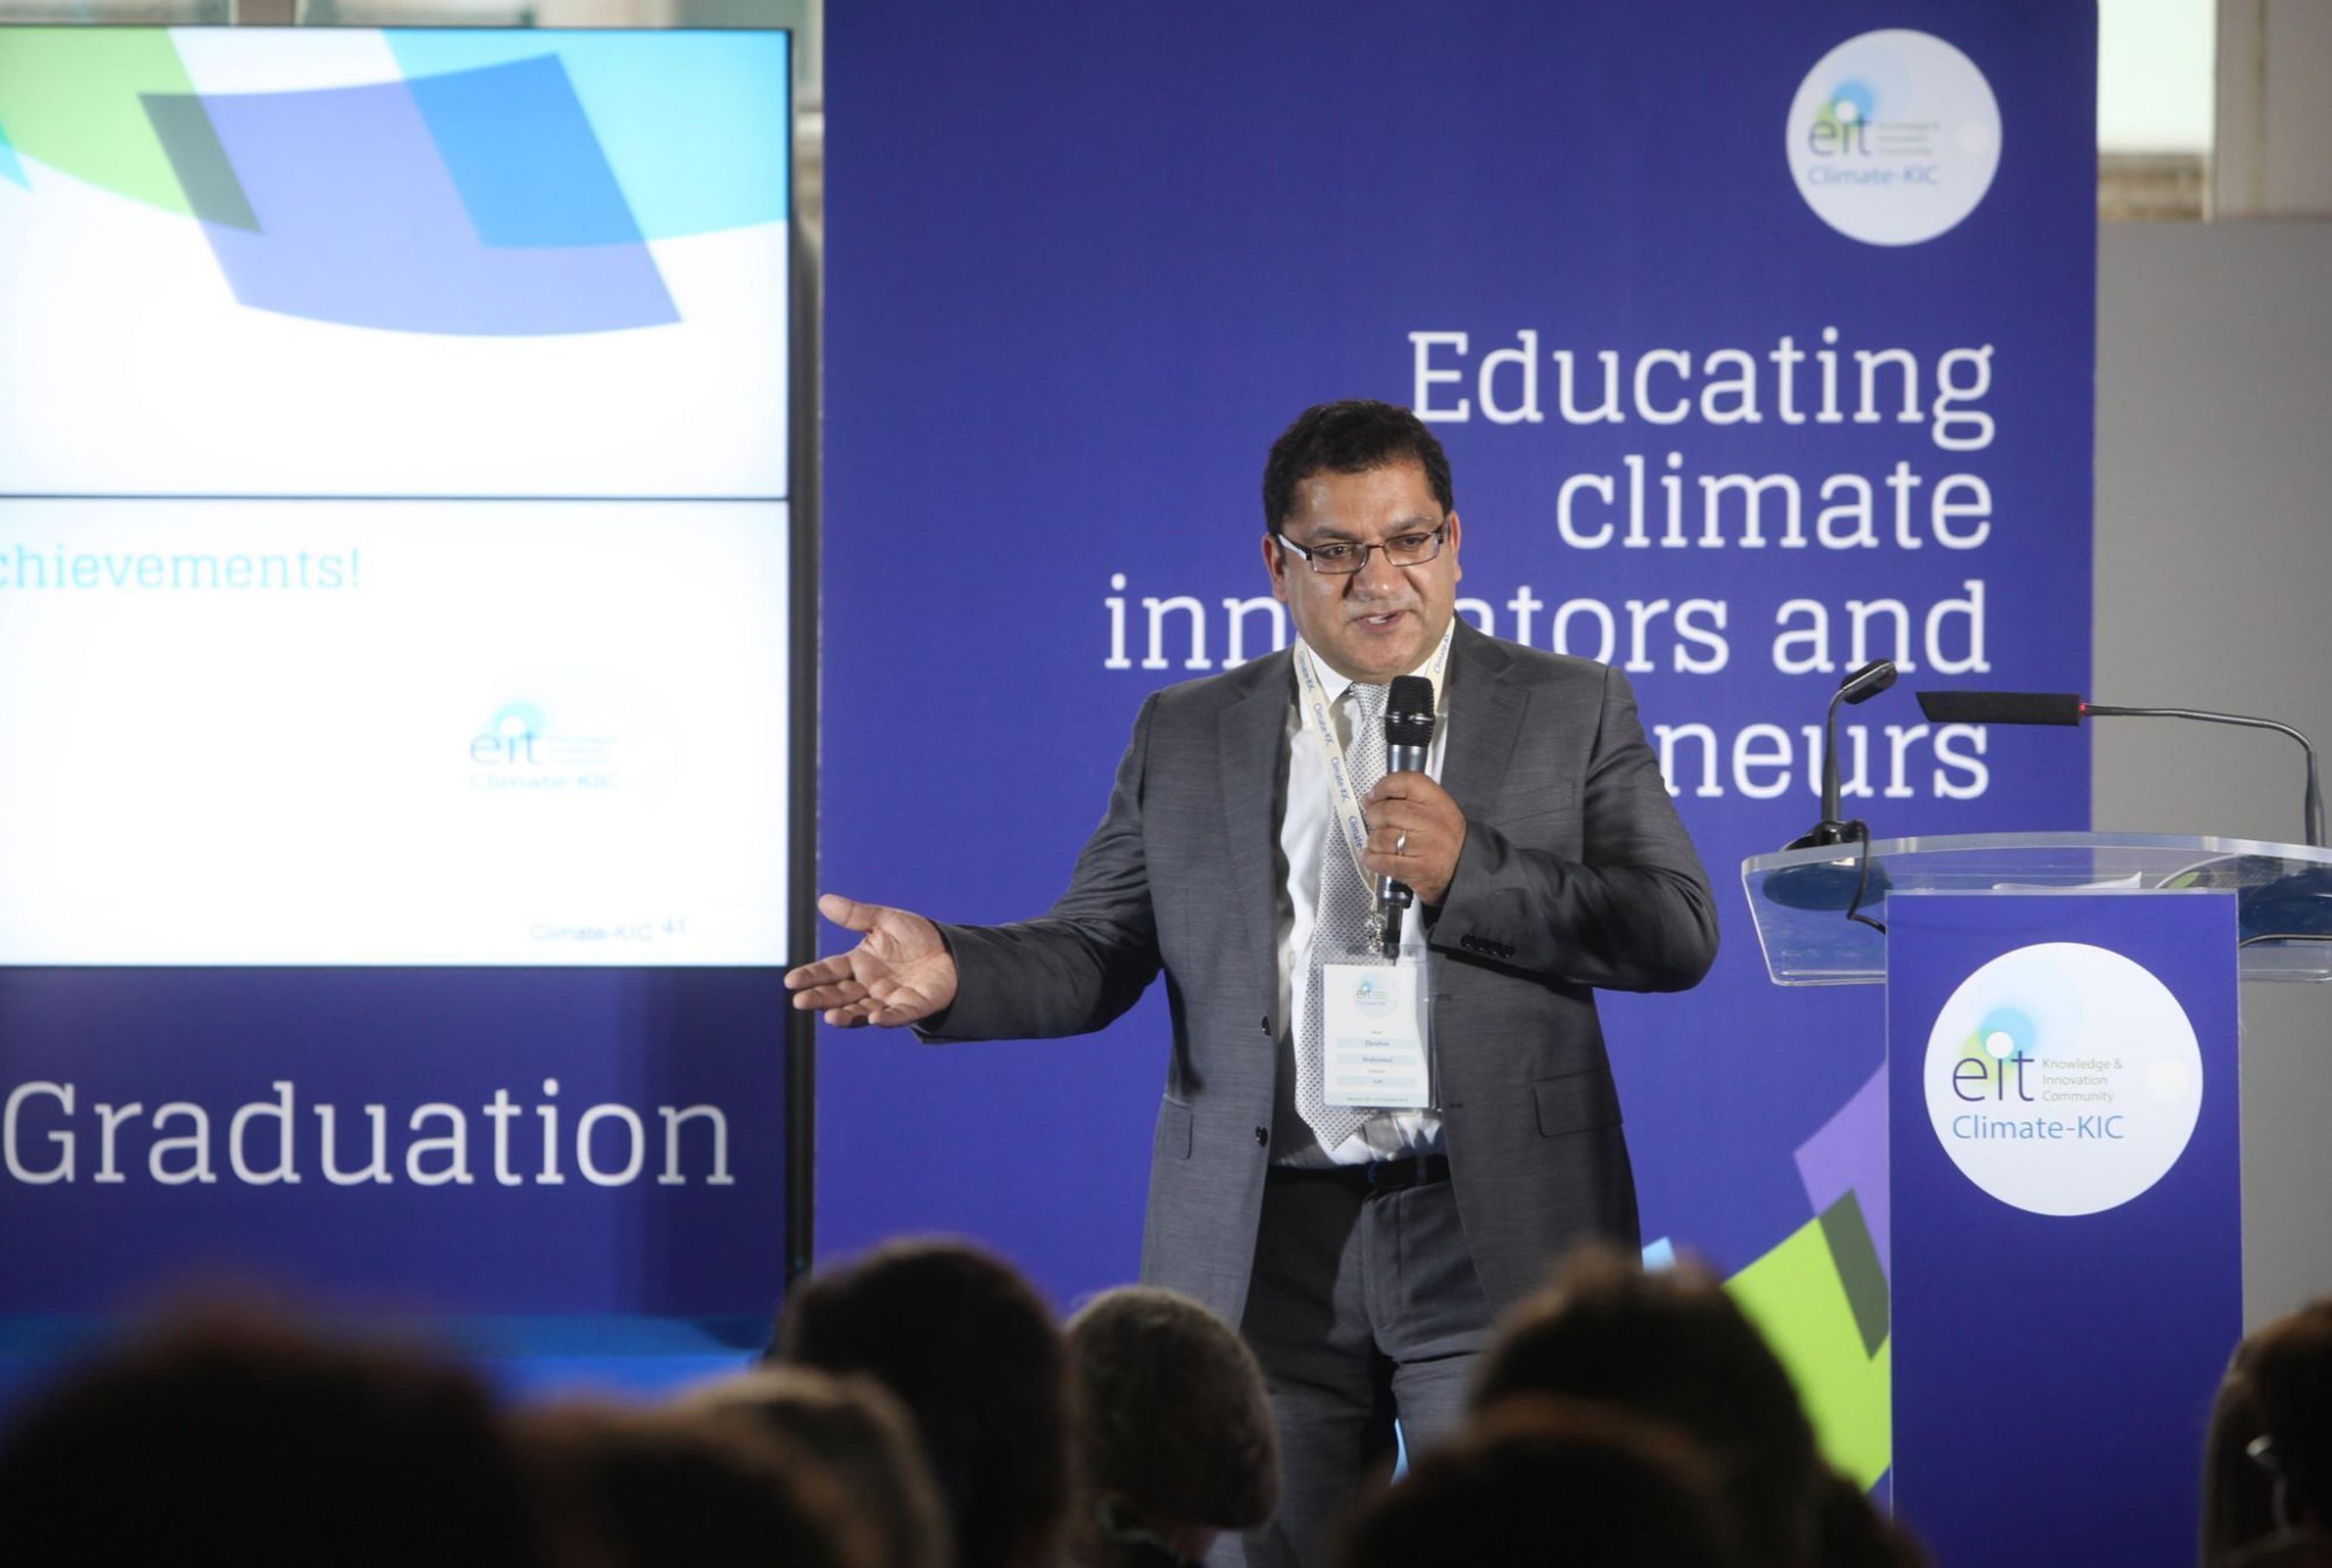 "Seeing these young talents dedicate their time to solving today's biggest challenges âeuro" instead of contributing to their causes âeuro" makes me confident that we are on the right track to make positive impact. This new generation of entrepreneurs is the key ingredient in solving our global challenges," says Ebrahim Mohamed, Director for Education, Climate-KIC, about Climate-KIC's European "The Journey" summer school programme. (PRNewsFoto/Climate-KIC)